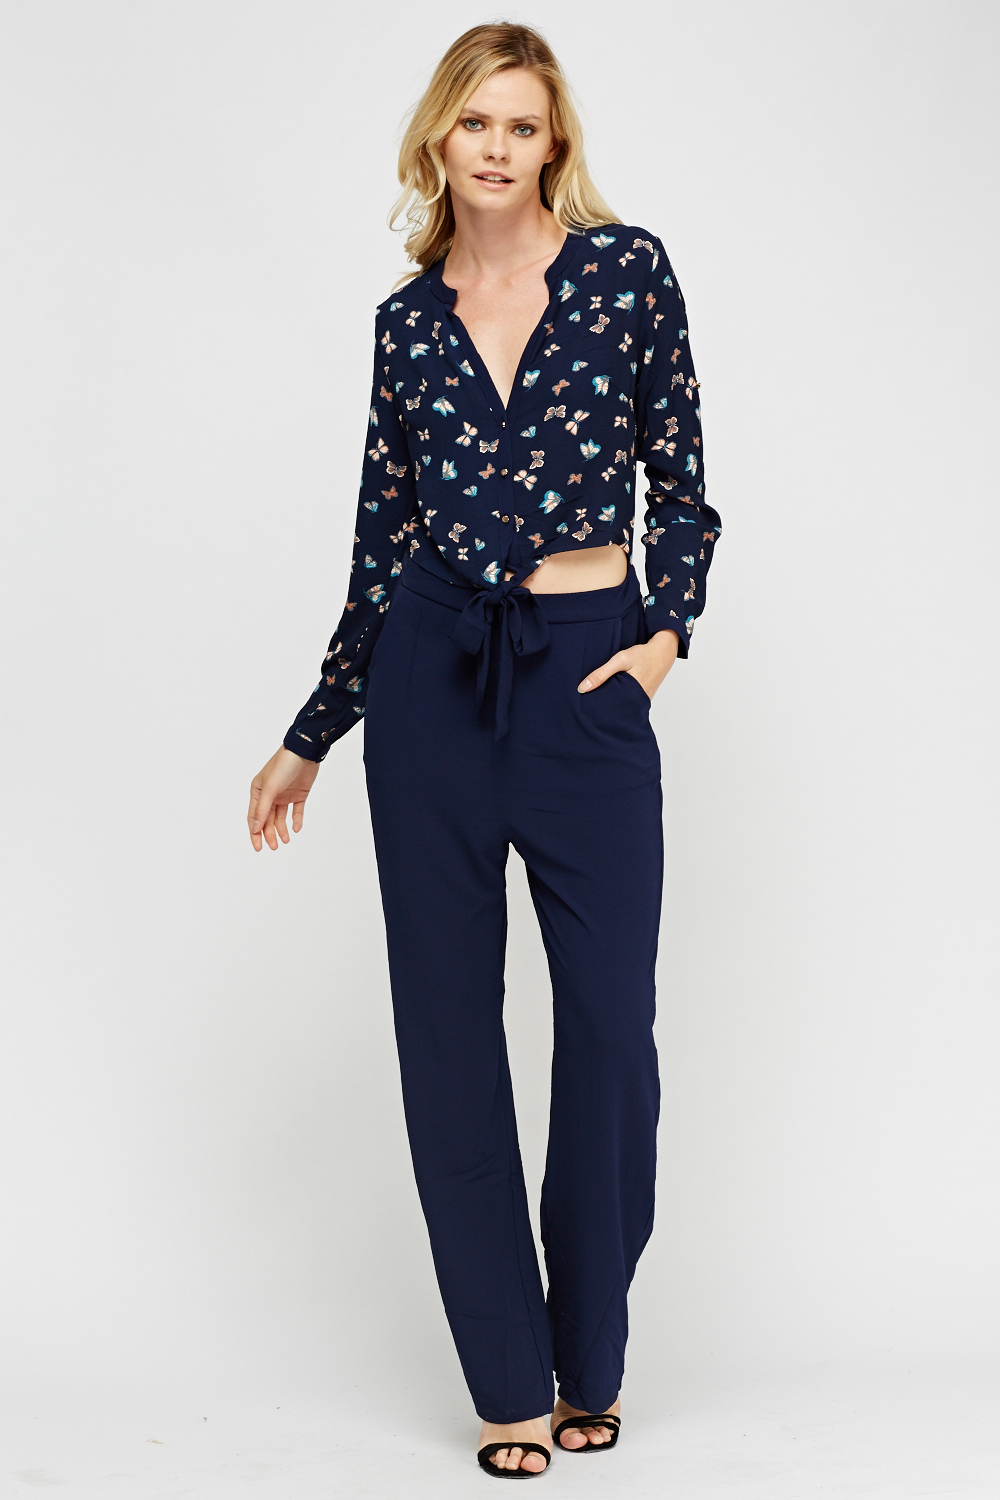 Butterfly Print Bodice Jumpsuit - Just $6